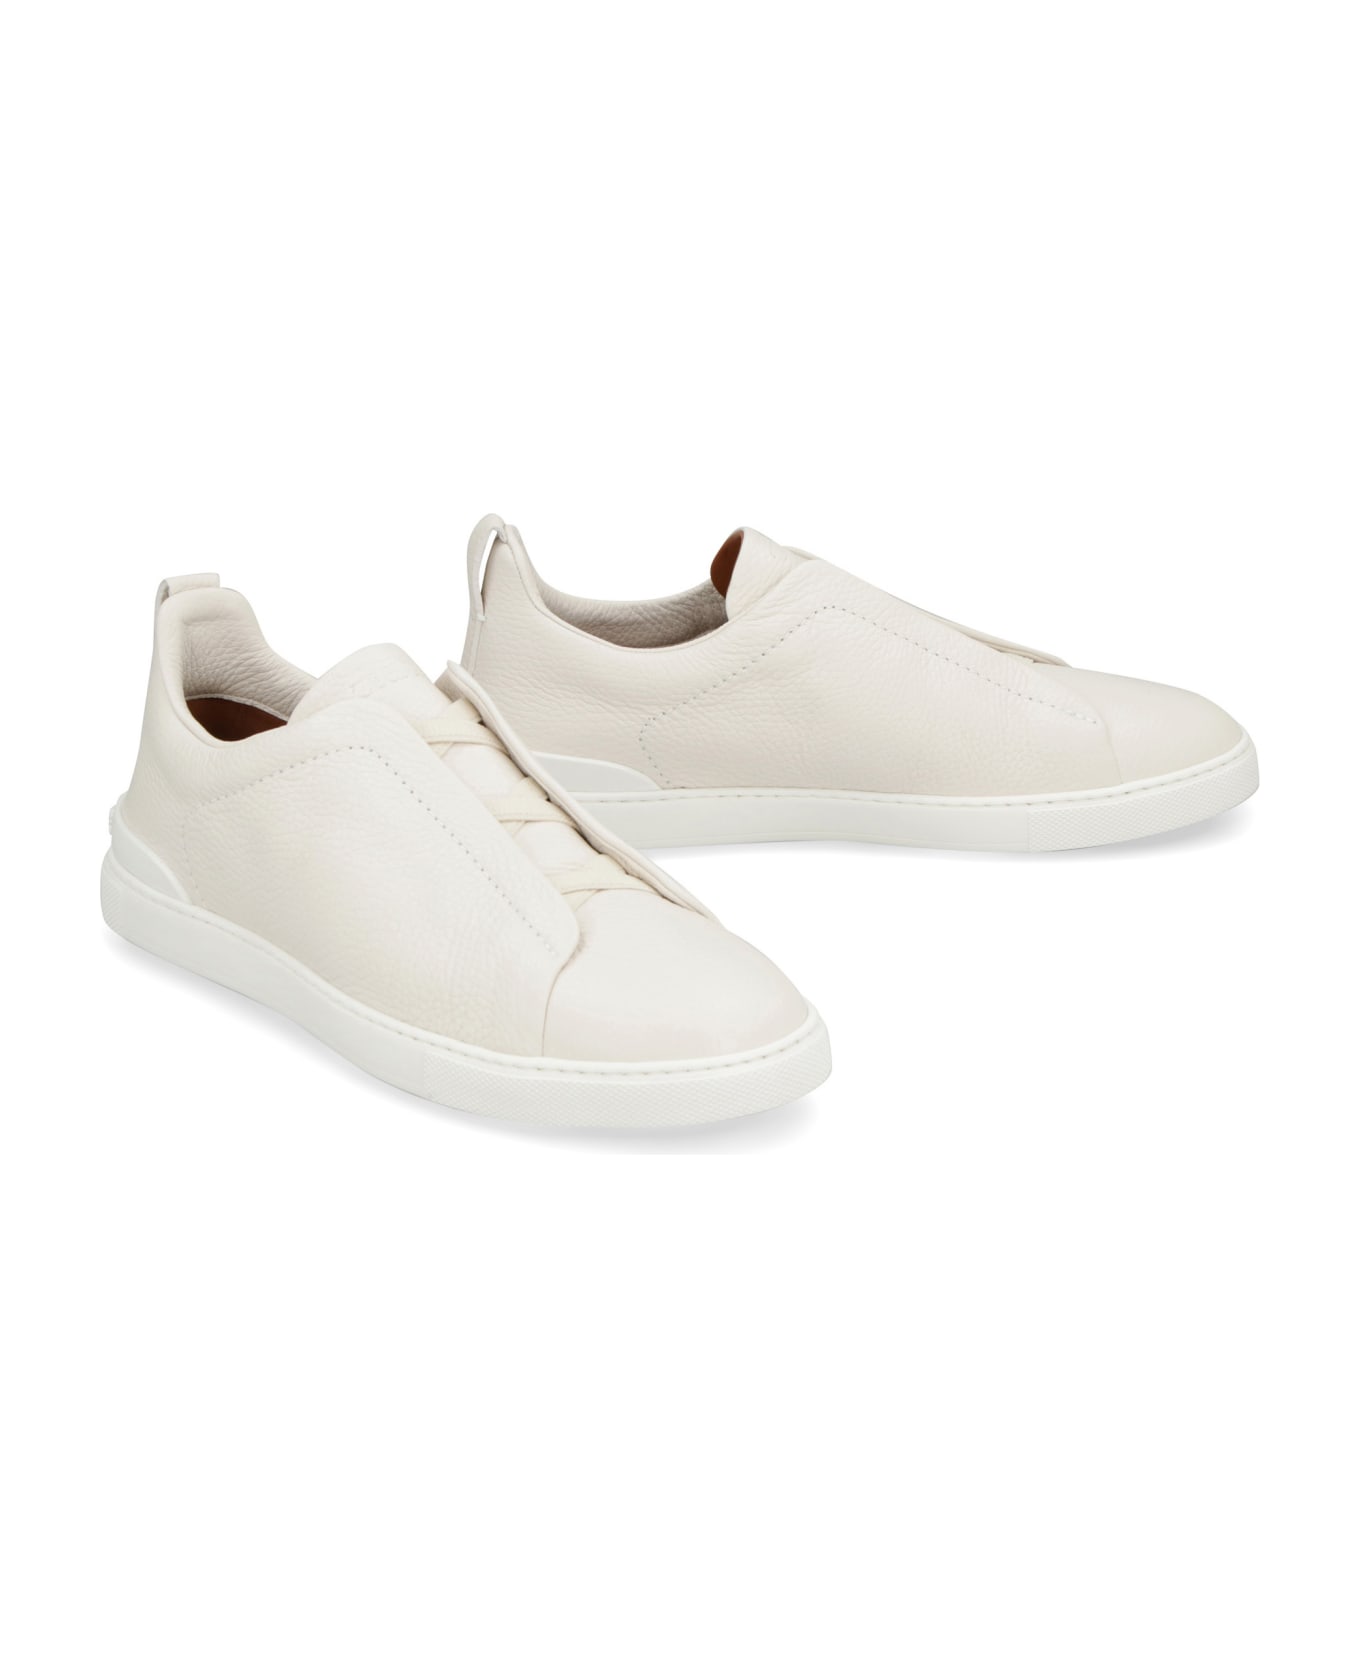 Zegna Triple Stitch Leather Sneakers - Ivory スニーカー